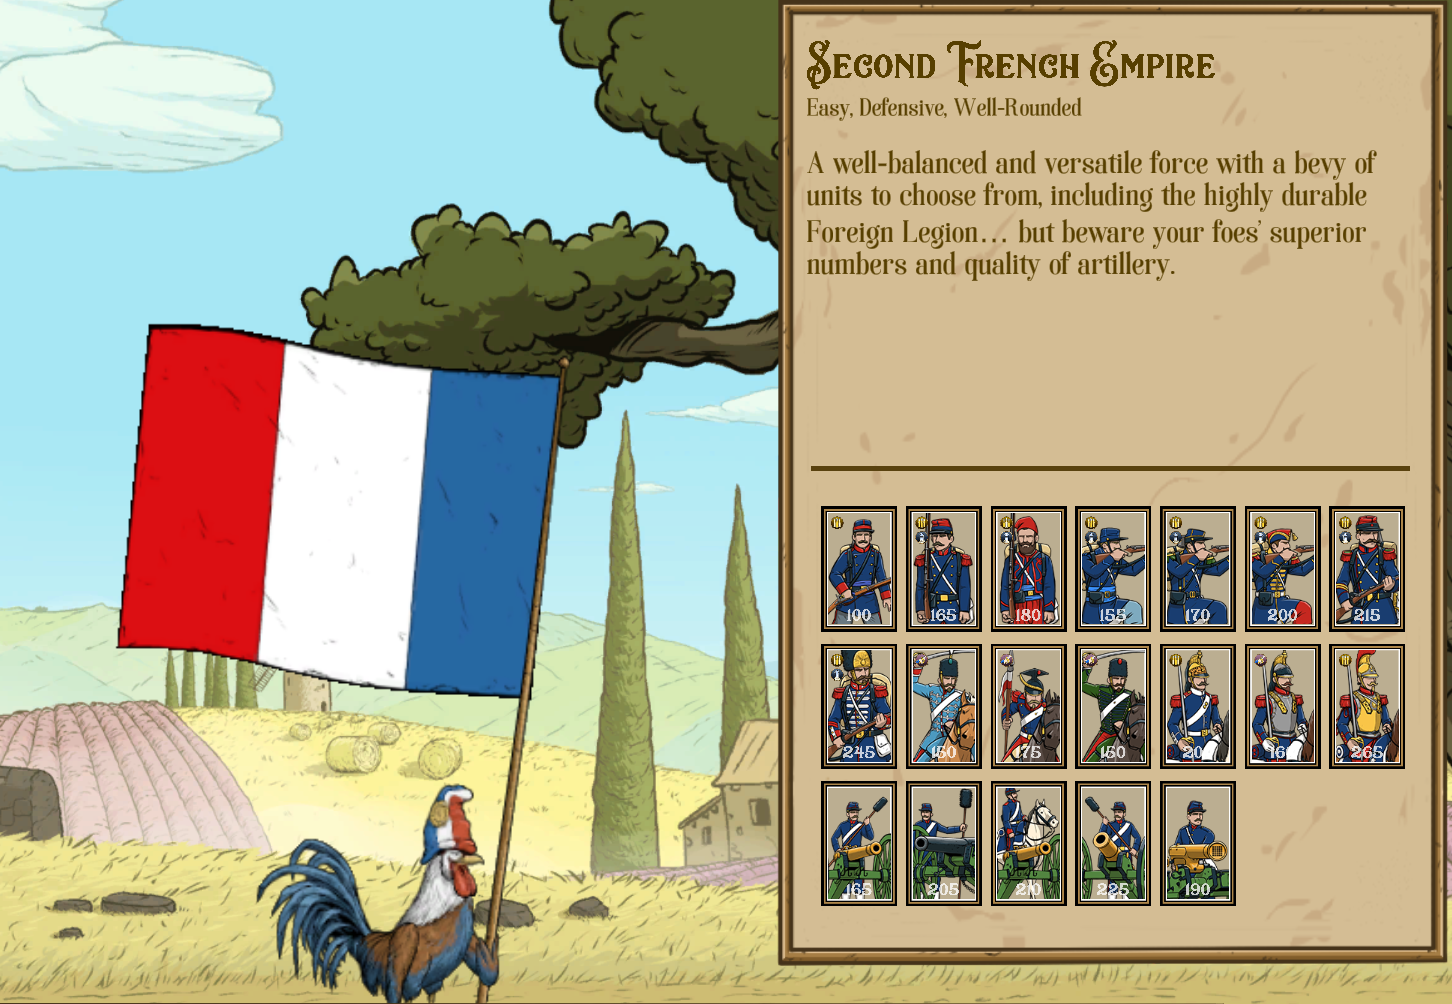 Fire & Maneuver All Faction and Unit Roster - Second French Empire - F9235B0